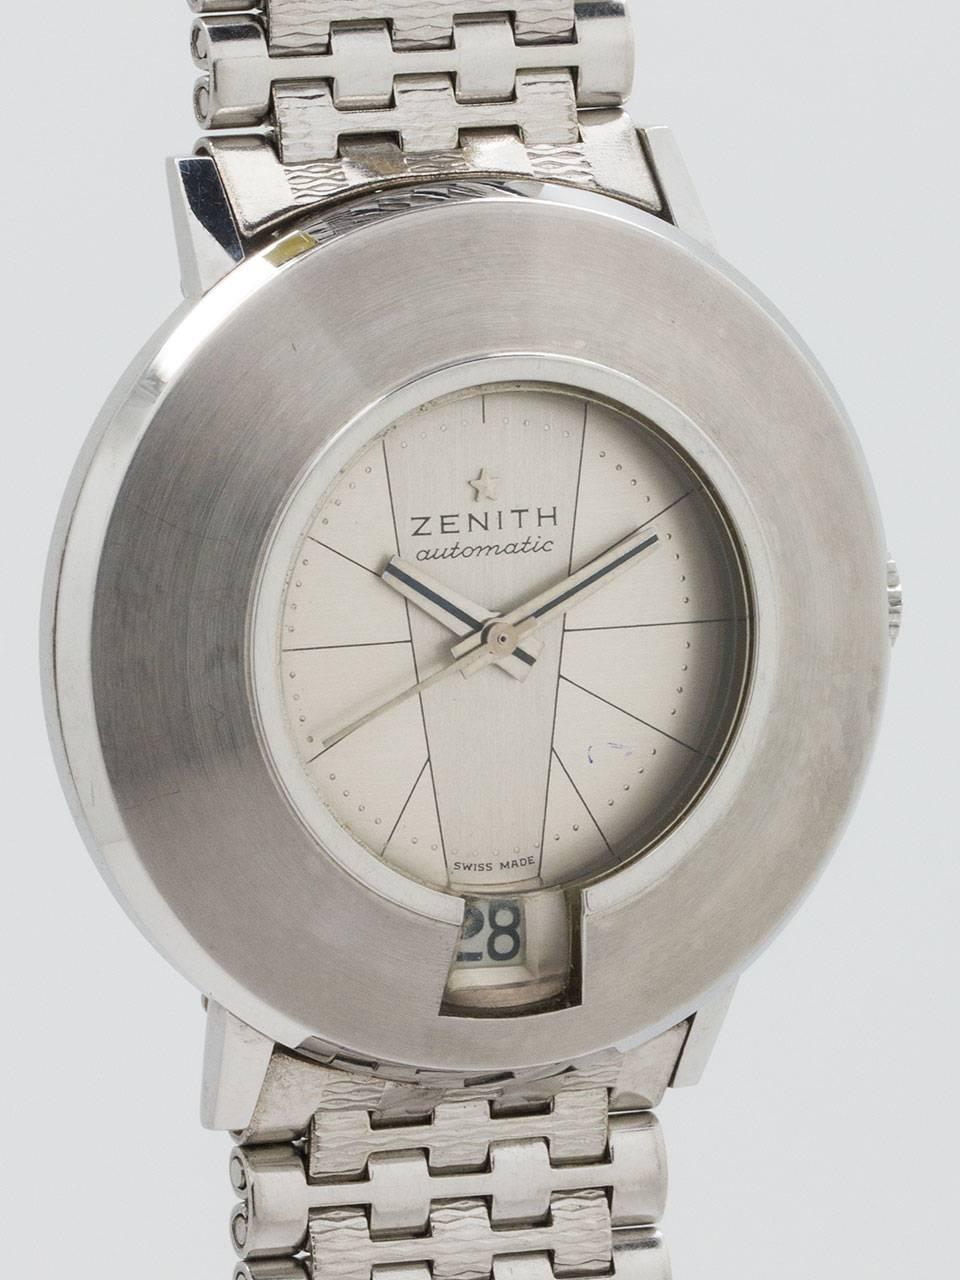 Zenith Stainless Steel Automatic circa 1960s. Very eccentric modern design 35.5 x 39mm case with wide bezel, signed star crown and acrylic crystal. Original 2 tone silvered satin dial with unique line design, applied star logo and printed minute